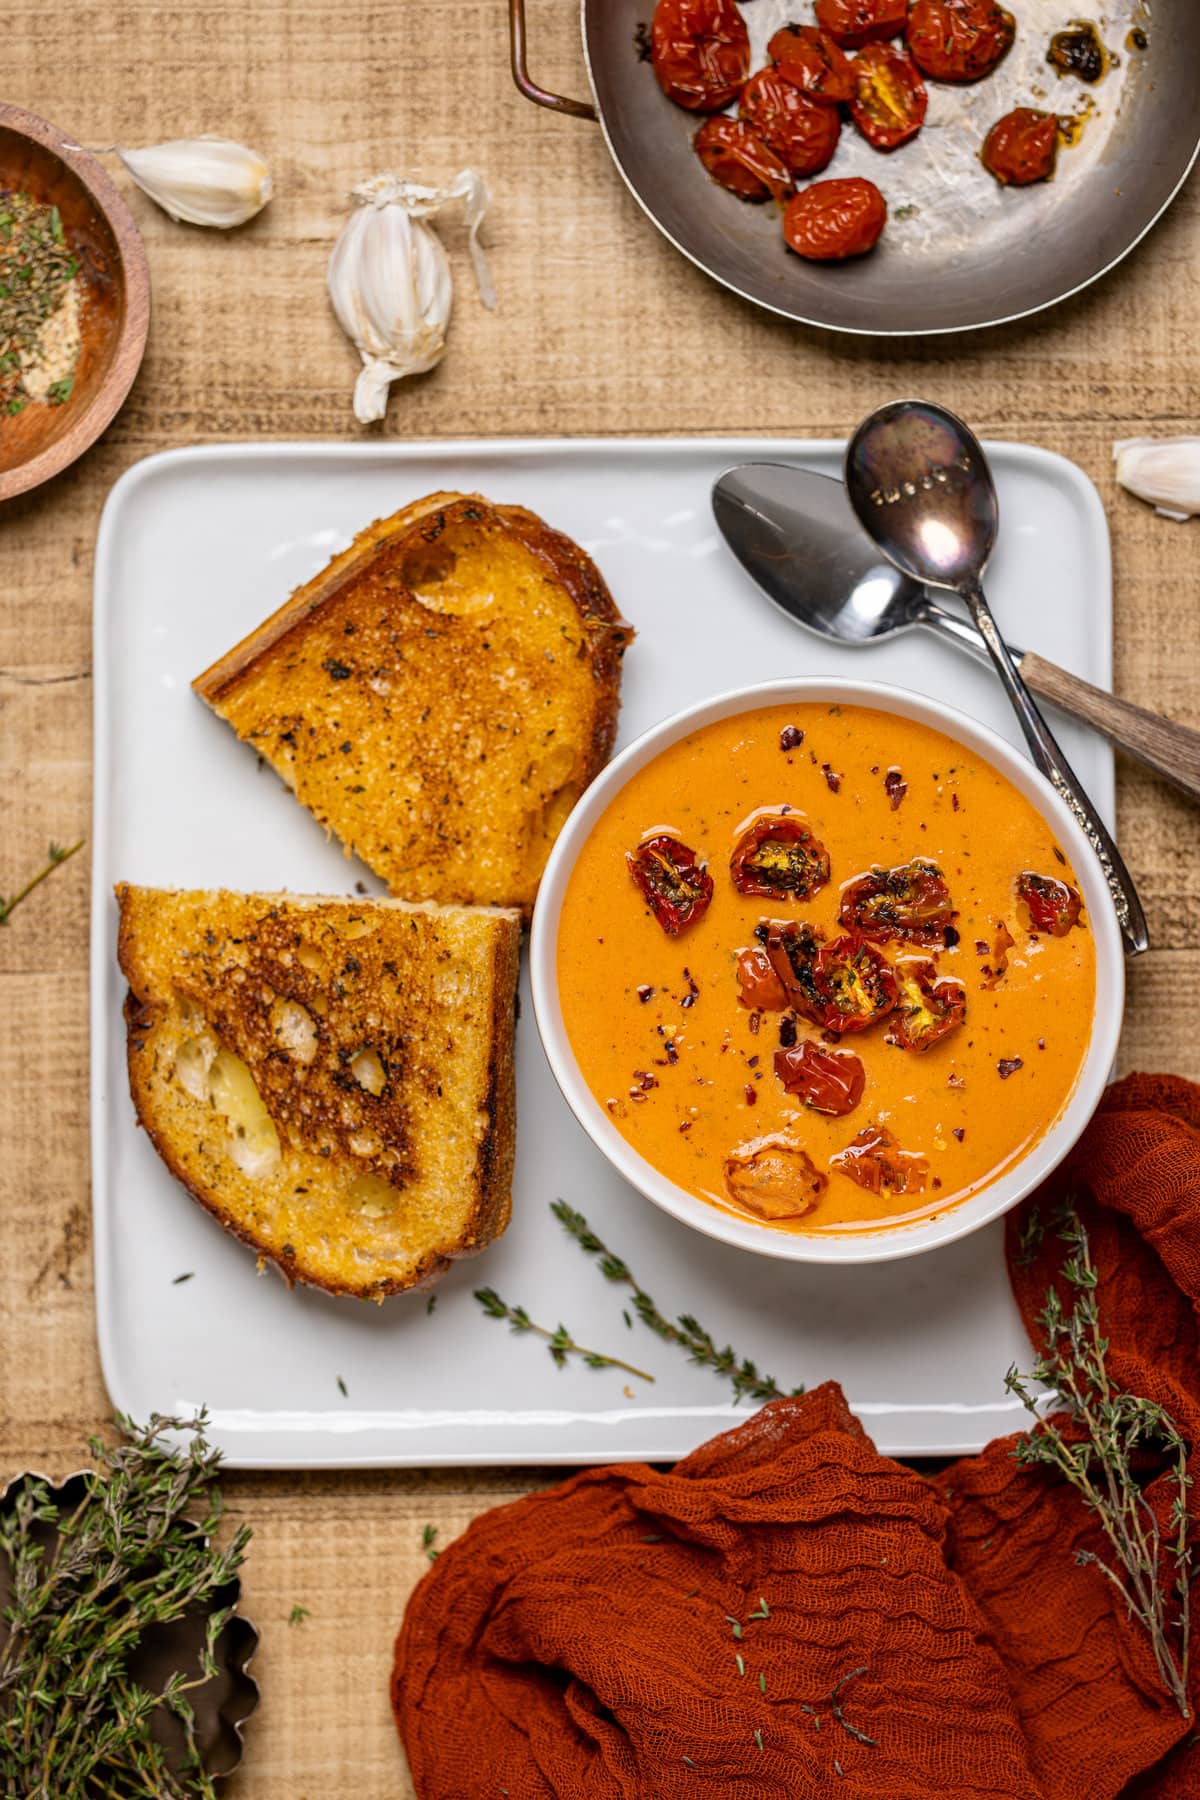 Bowl of Creamy Roasted Garlic Tomato Soup next to a grilled cheese sandwich